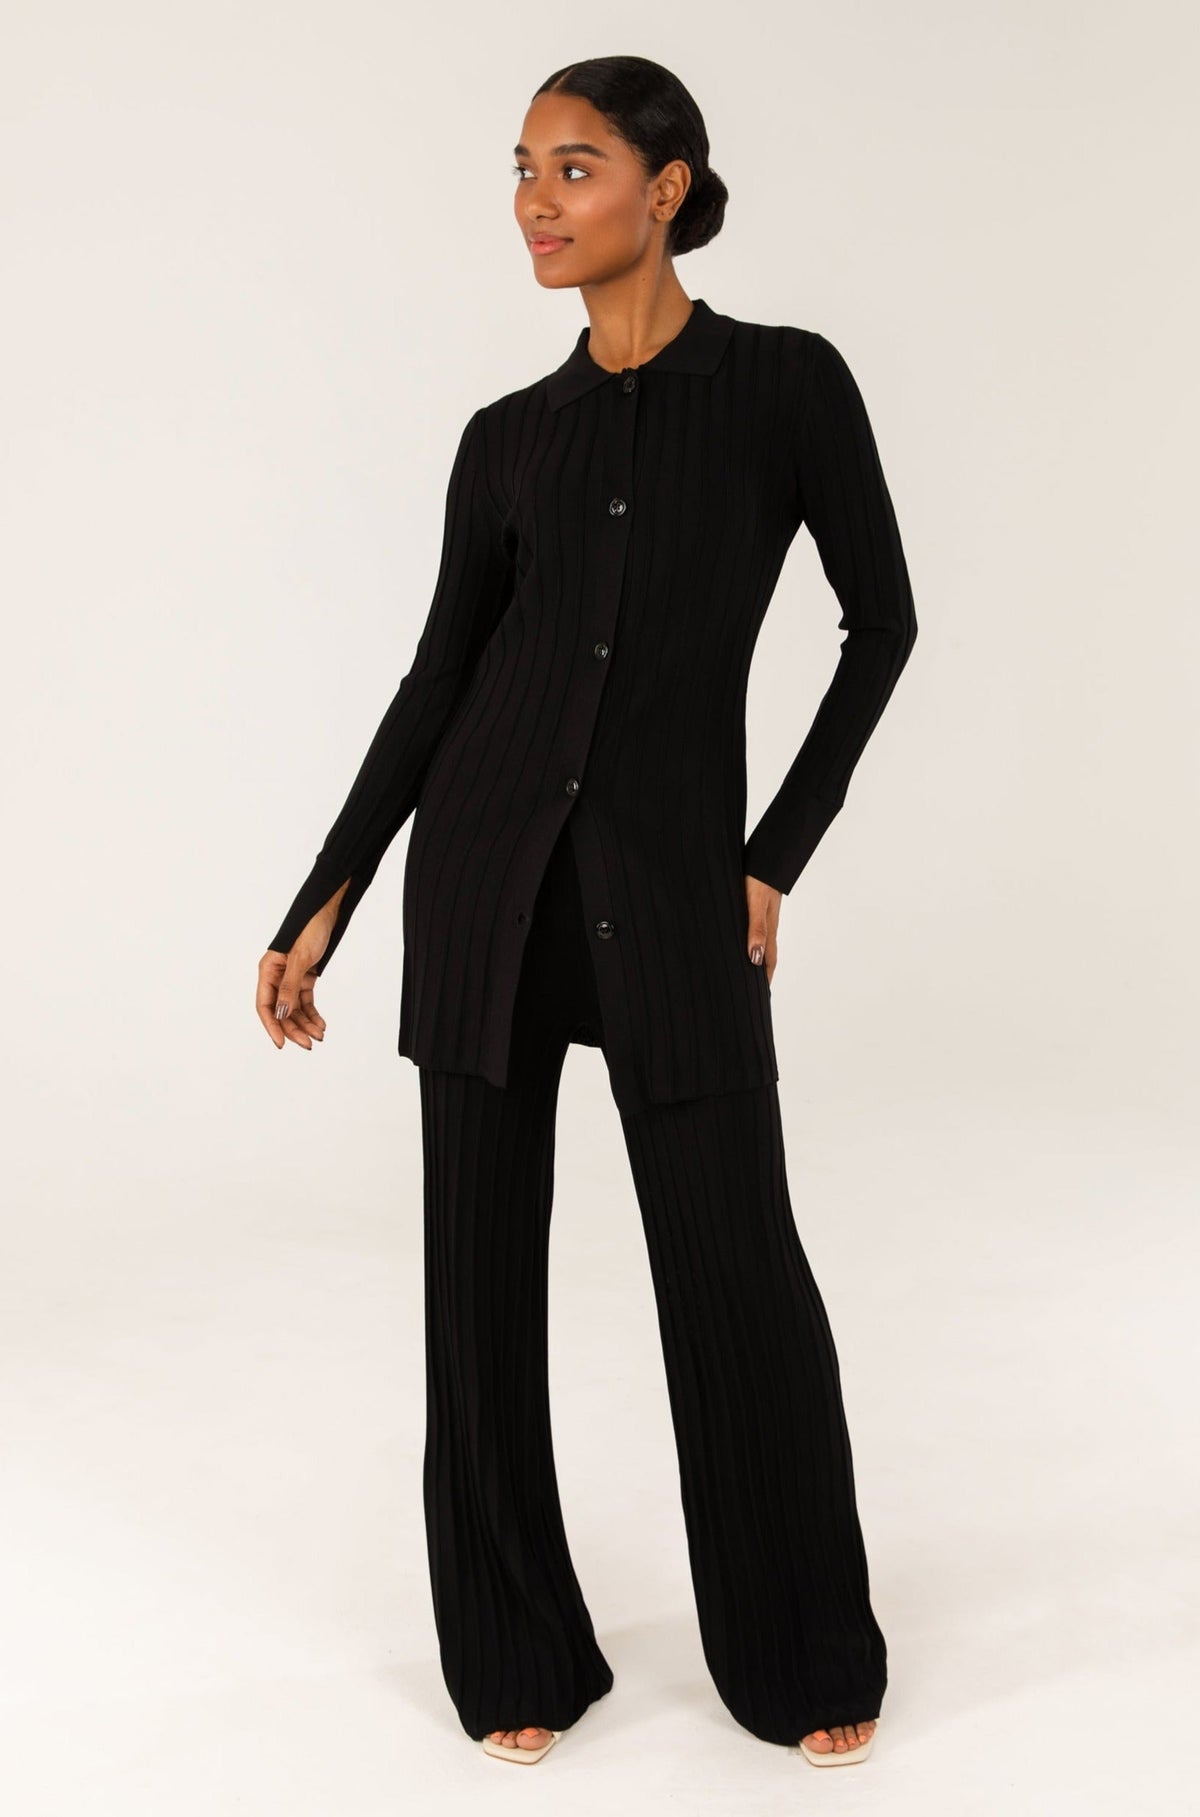 Ribbed Piping Button Up Split Cuff Top - Black Veiled 